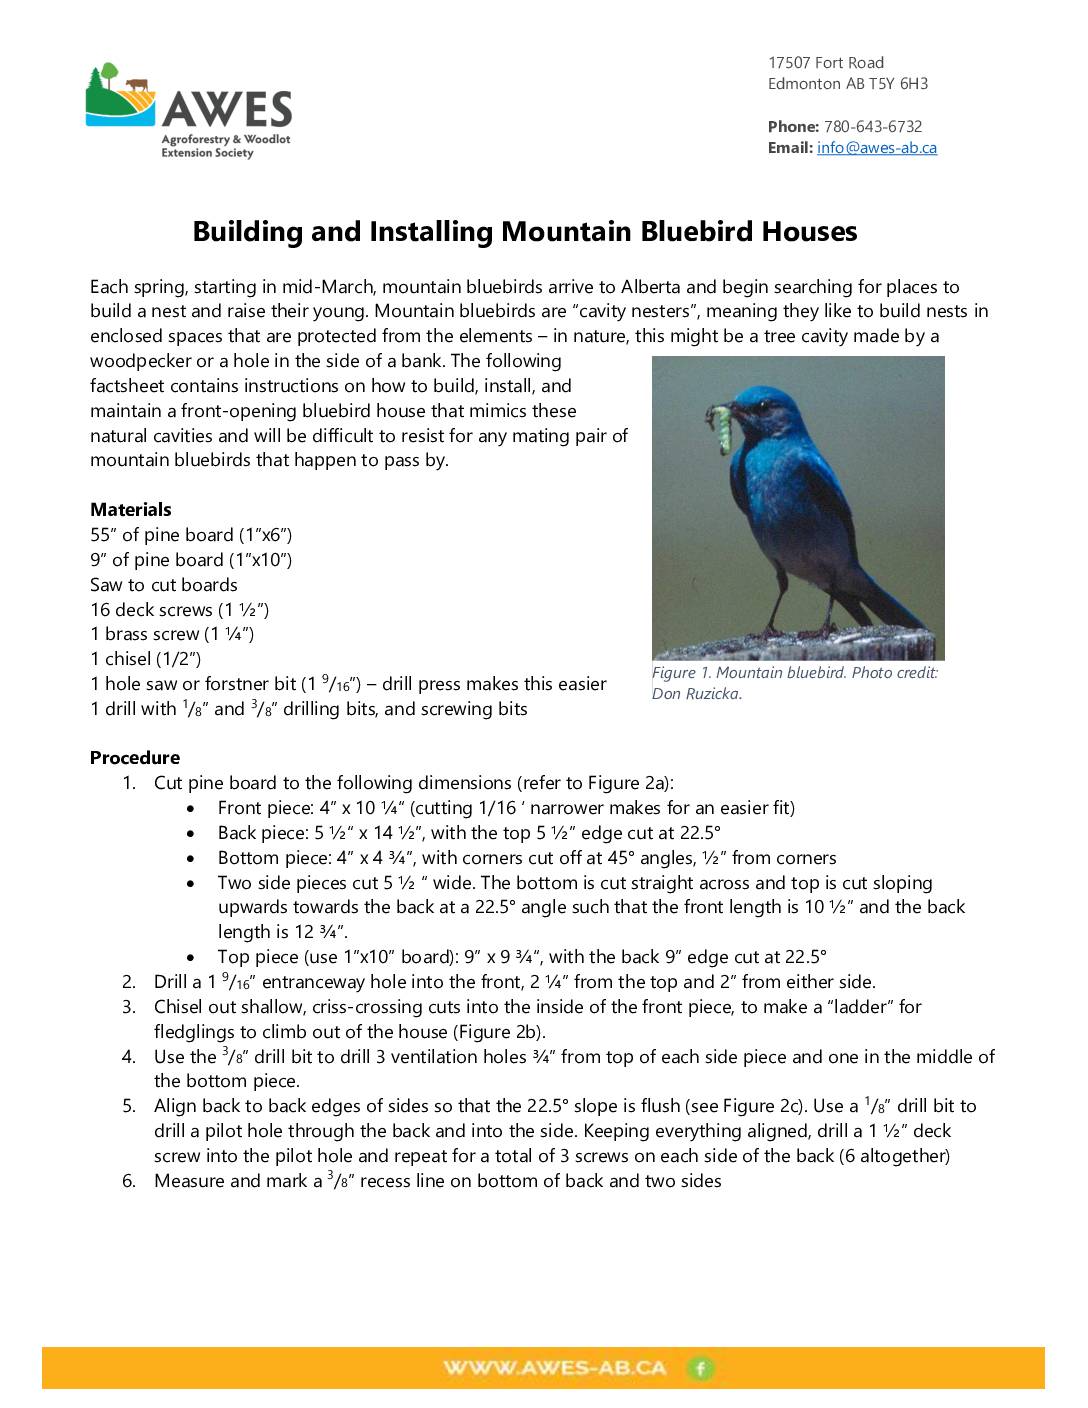 Building and Installing Bluebird Houses